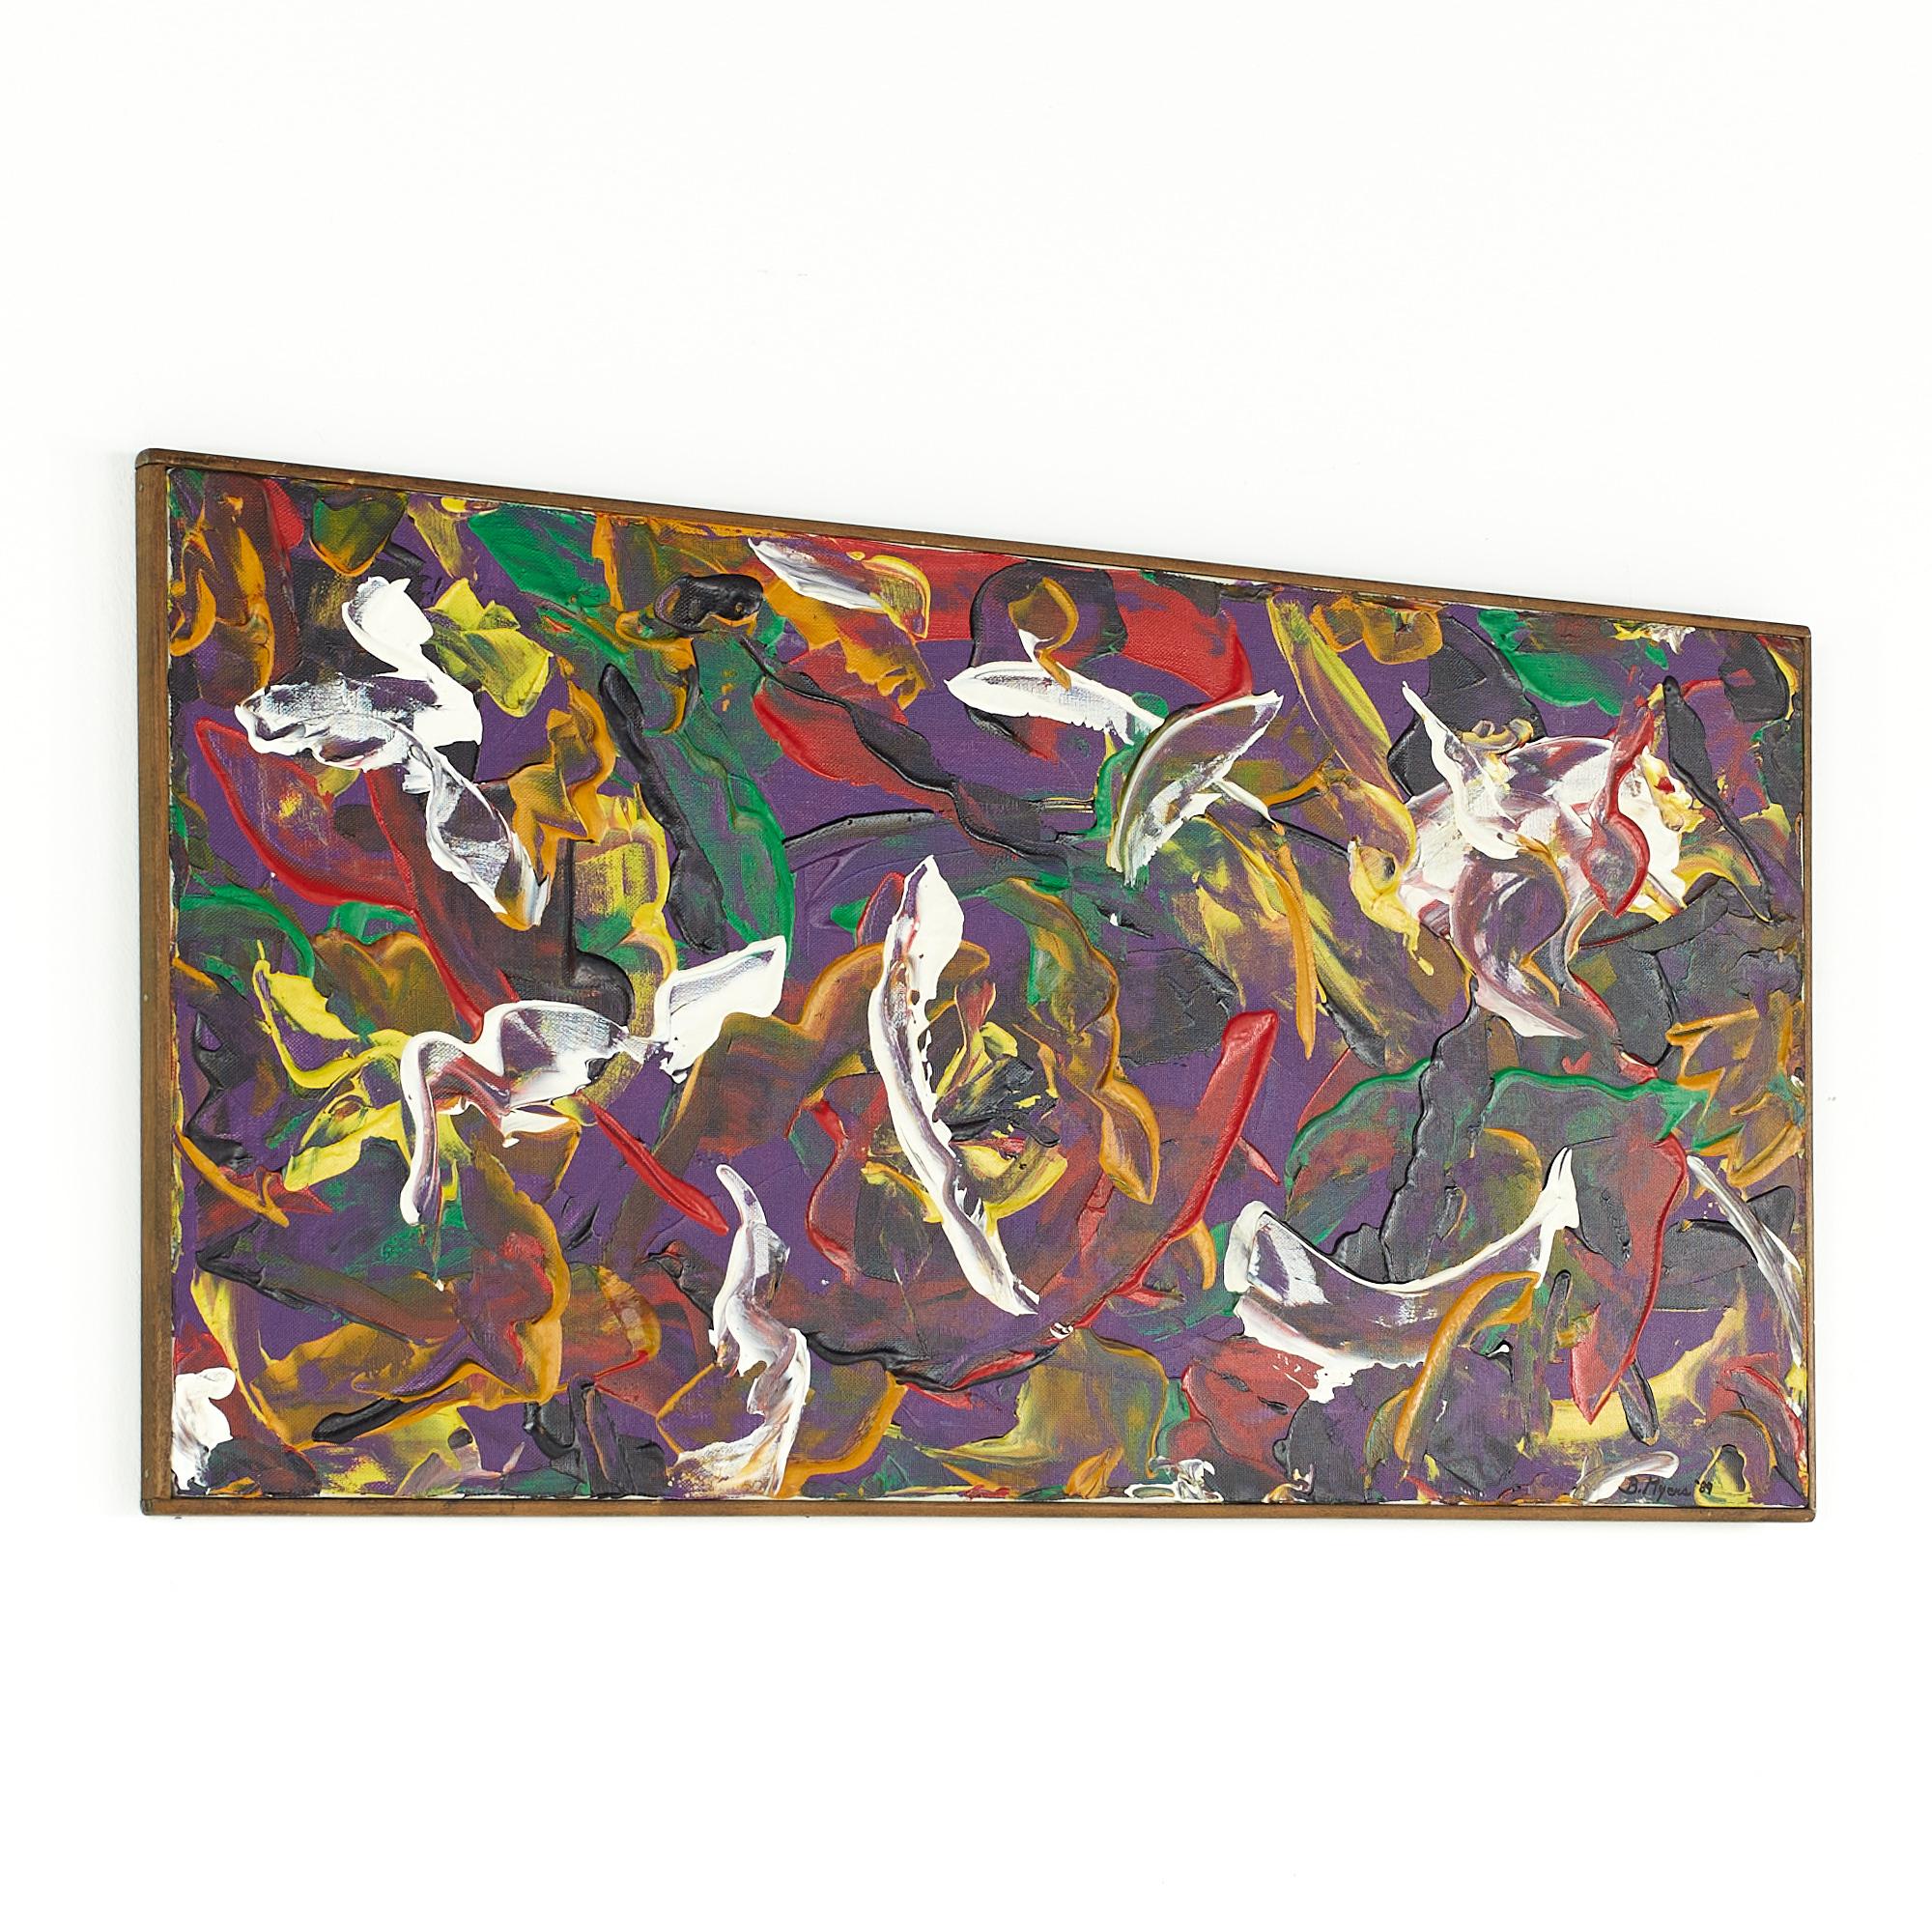 Bruce Myers mid-century abstract original oil on canvas painting.

This painting measures: 15.5 wide x .75 deep x 30.5 inches high

This painting is in Excellent Vintage Condition with minor marks, dents, and wear.

We take our photos in a